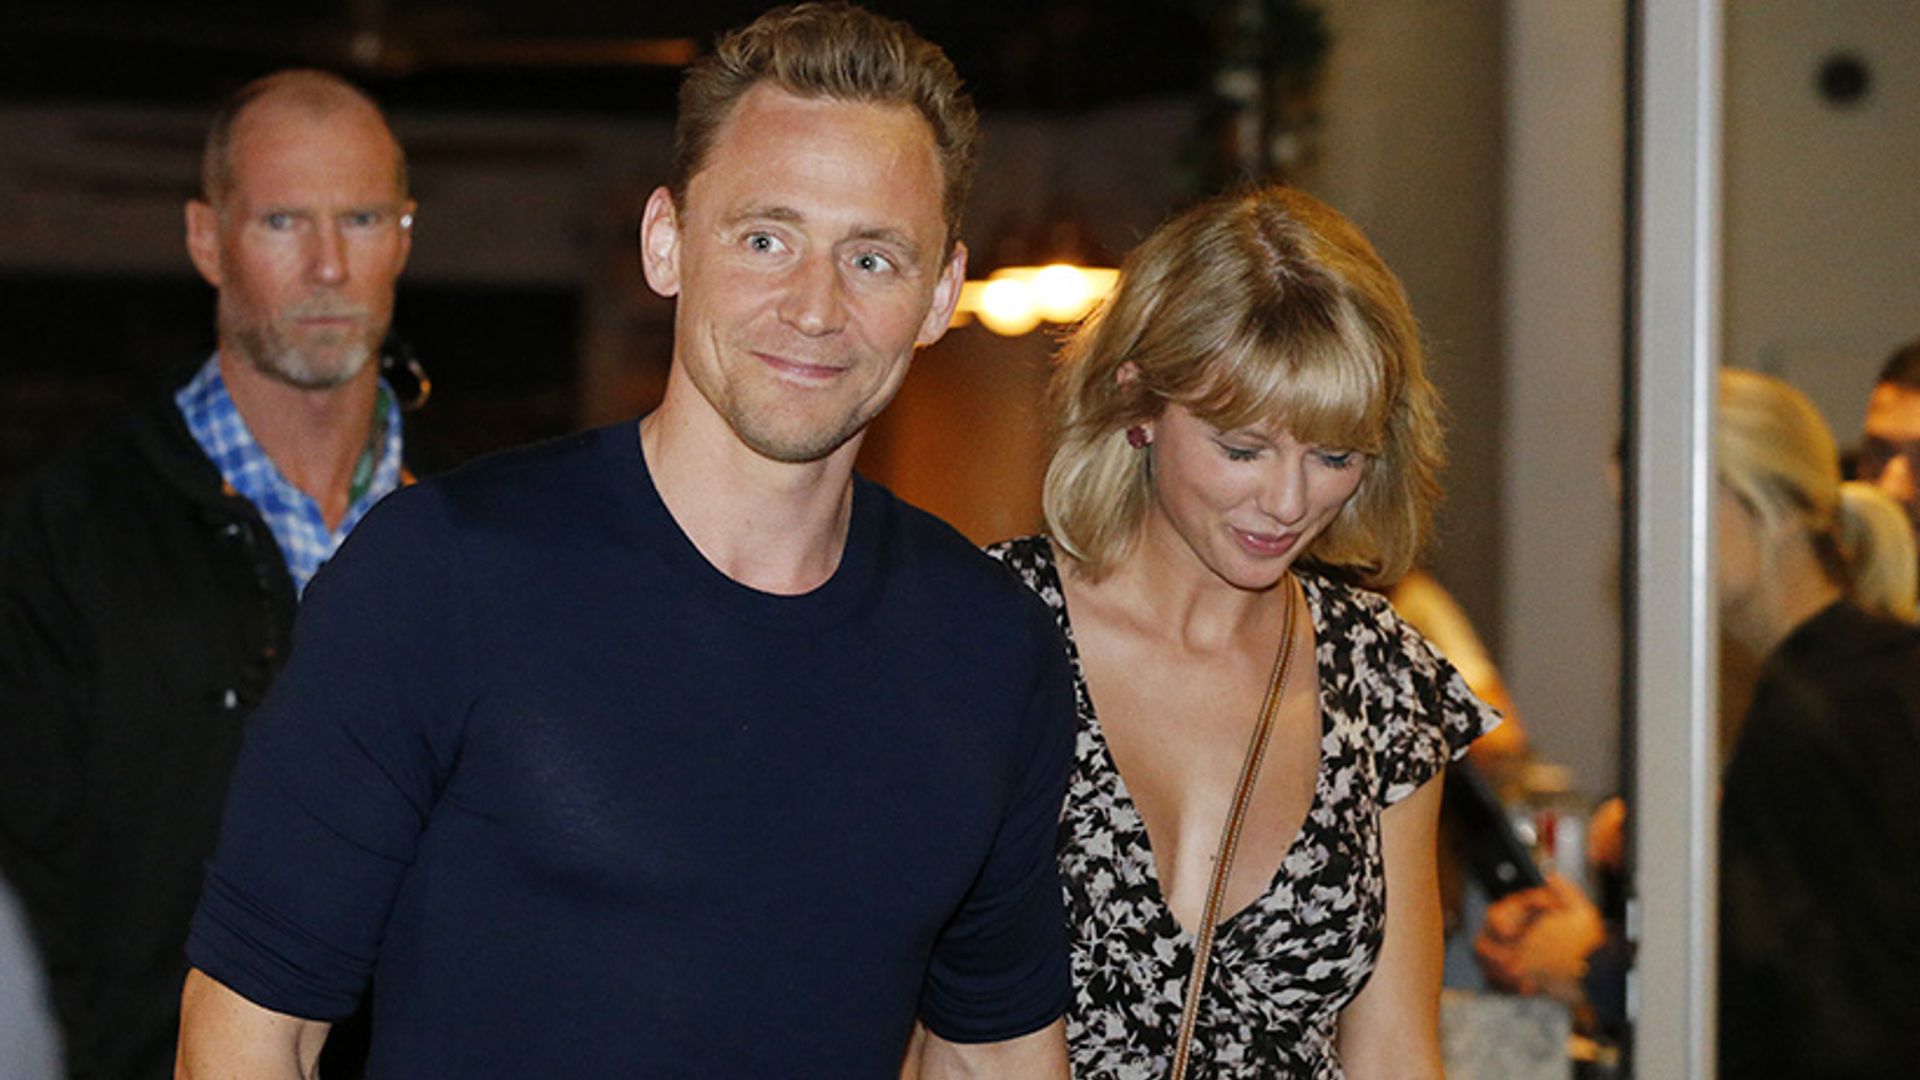 Taylor Swift and Tom Hiddleston reunite for romantic dinner date